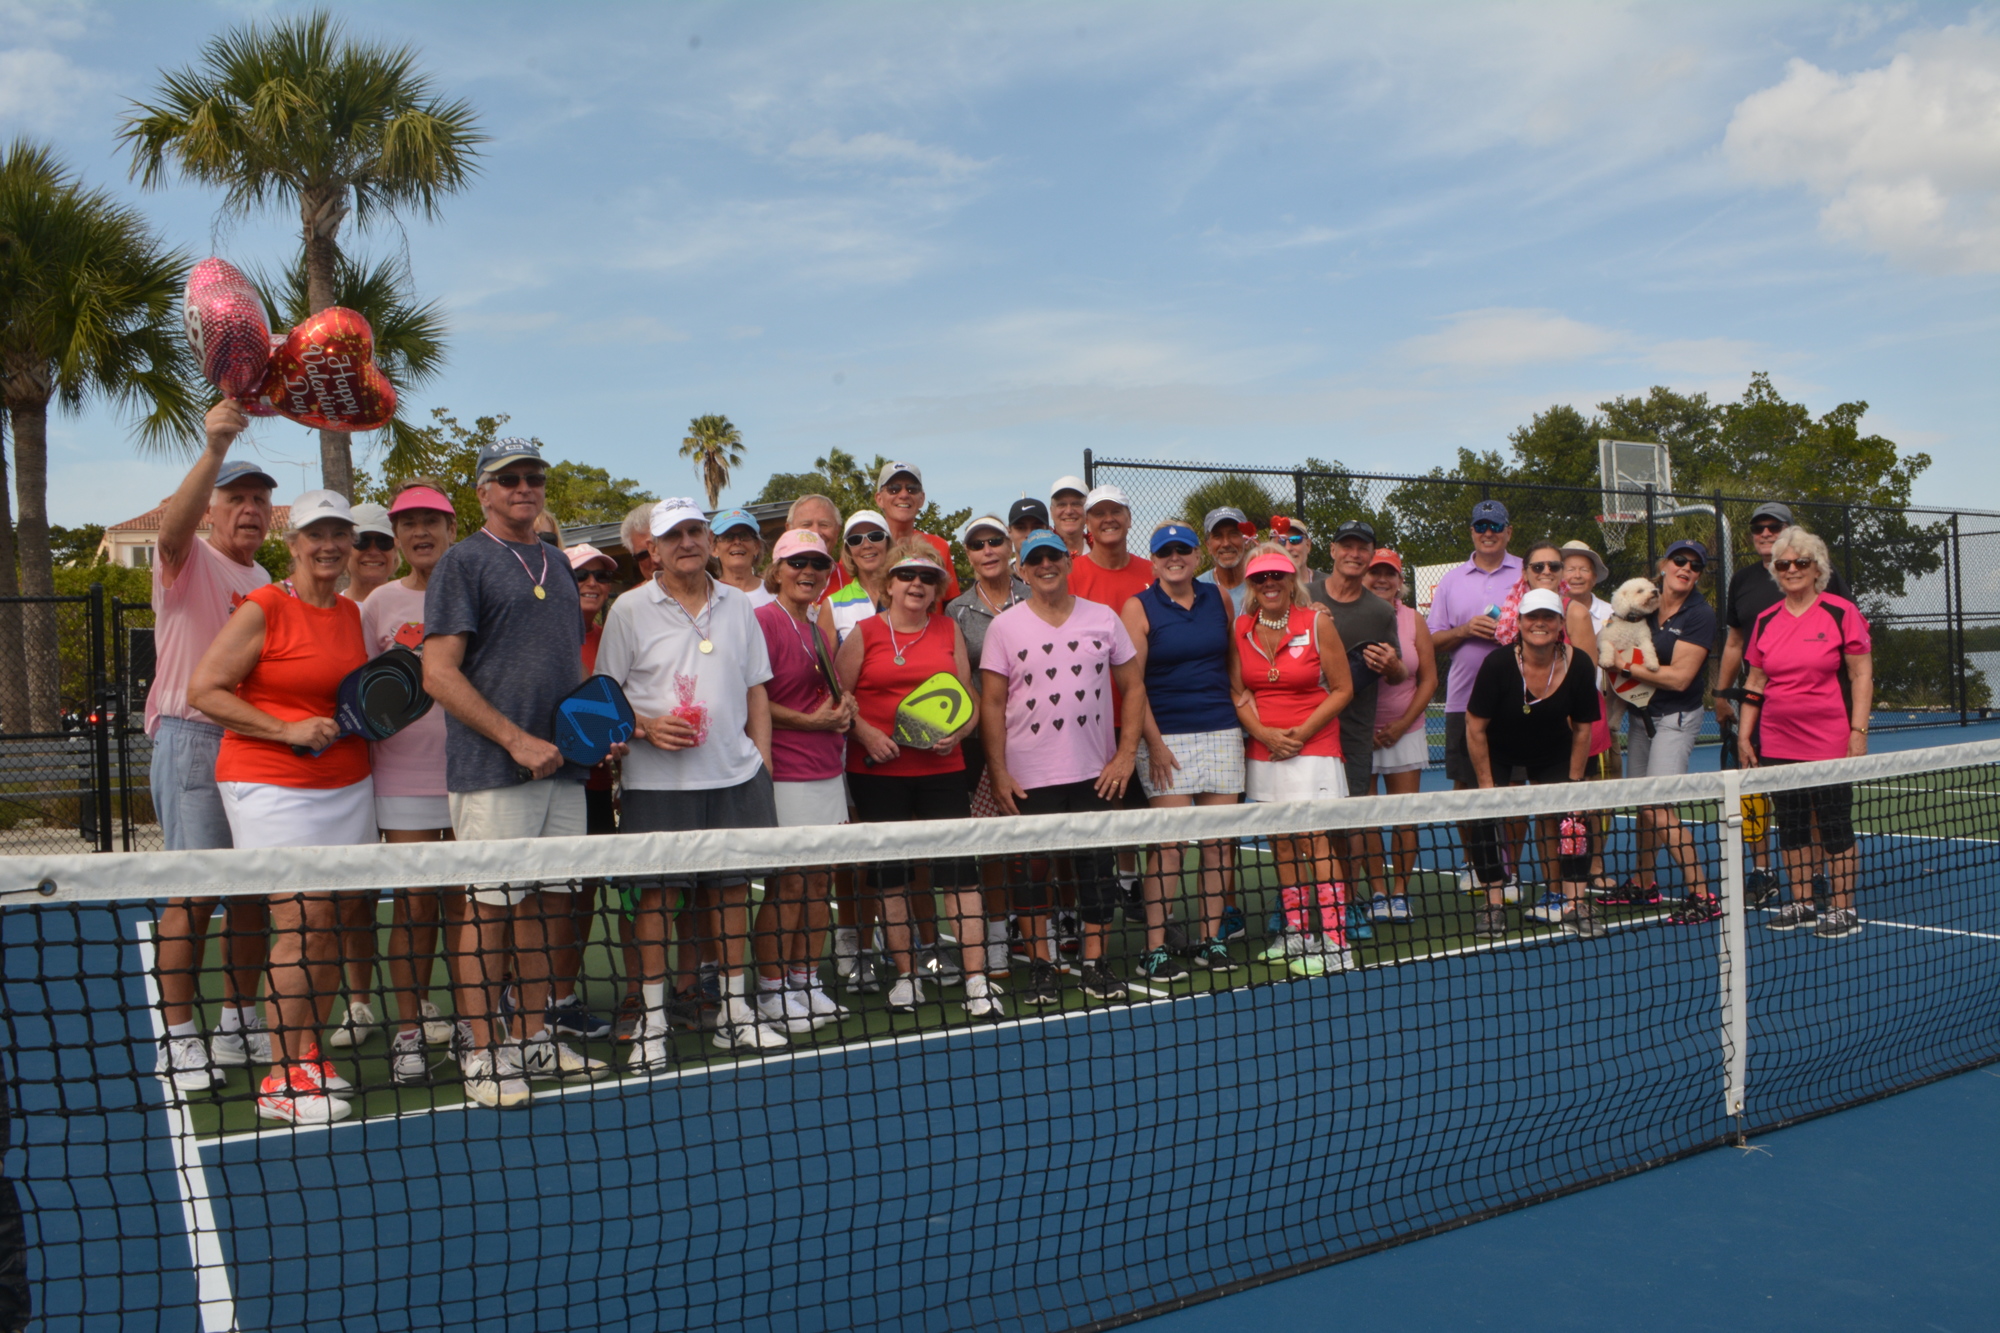 People who stayed until the end of the Beauty and the Beast tournament pose on one of the pickleball courts Friday.